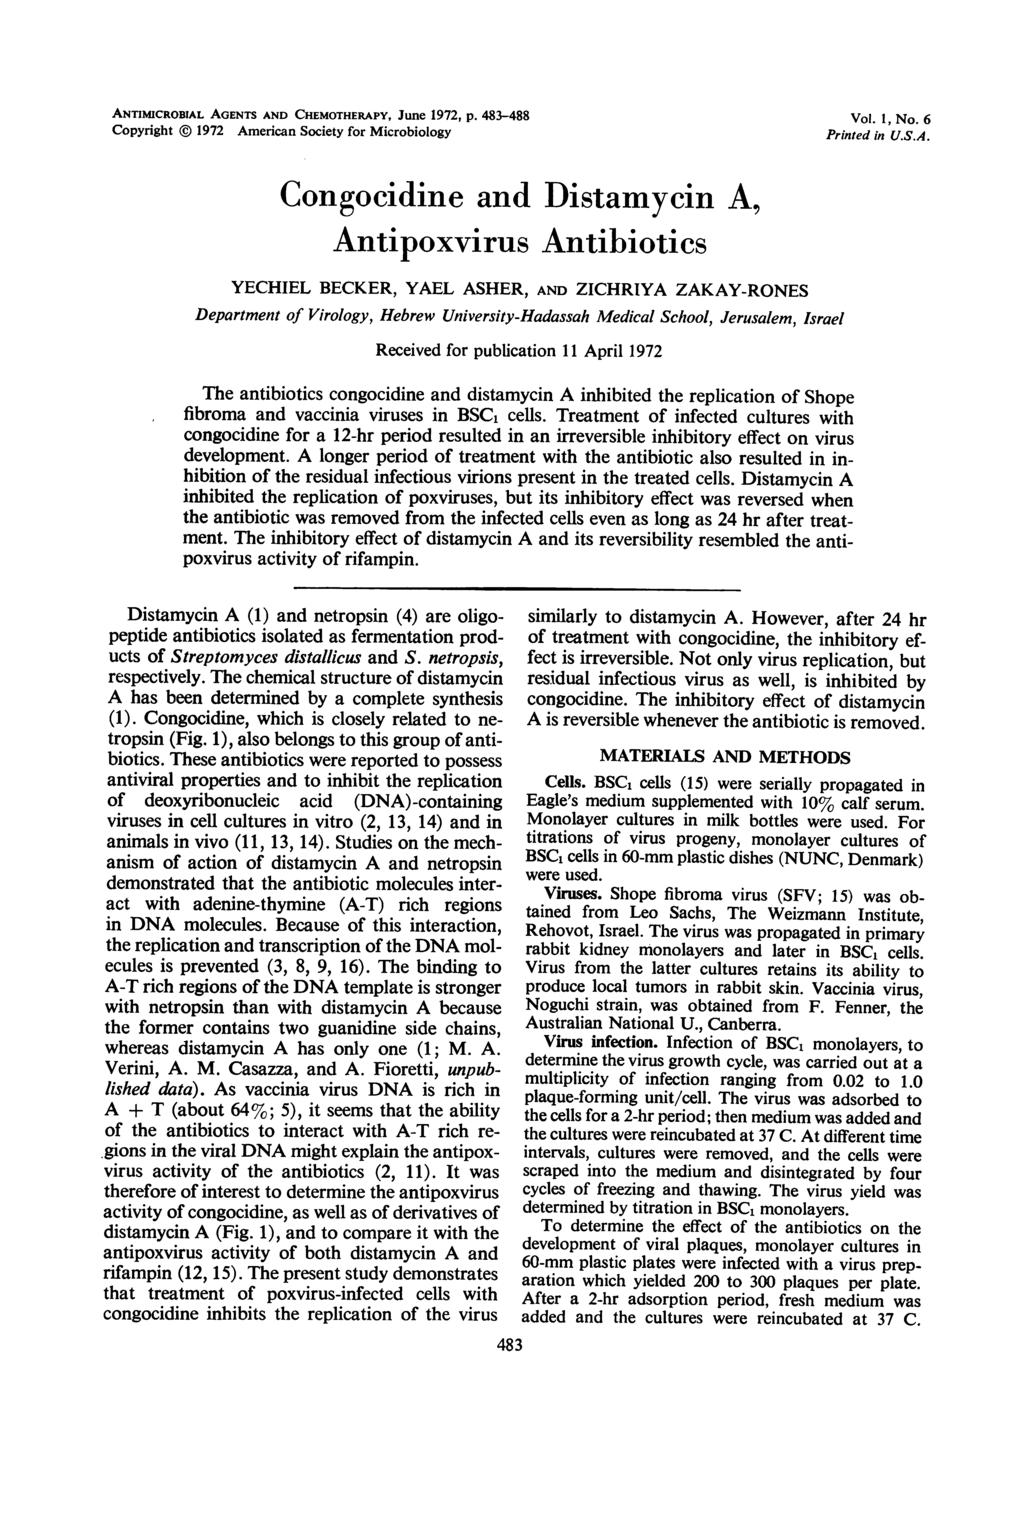 ANTIMICROBIAL AGENTS AND CHEMOTHERAPY, June 1972, p. 483-488 Vol. 1, No. 6 Copyright 1972 American Society for Microbiology Printed in U.S.A. Congocidine and Distamycin A, Antipoxvirus Antibiotics